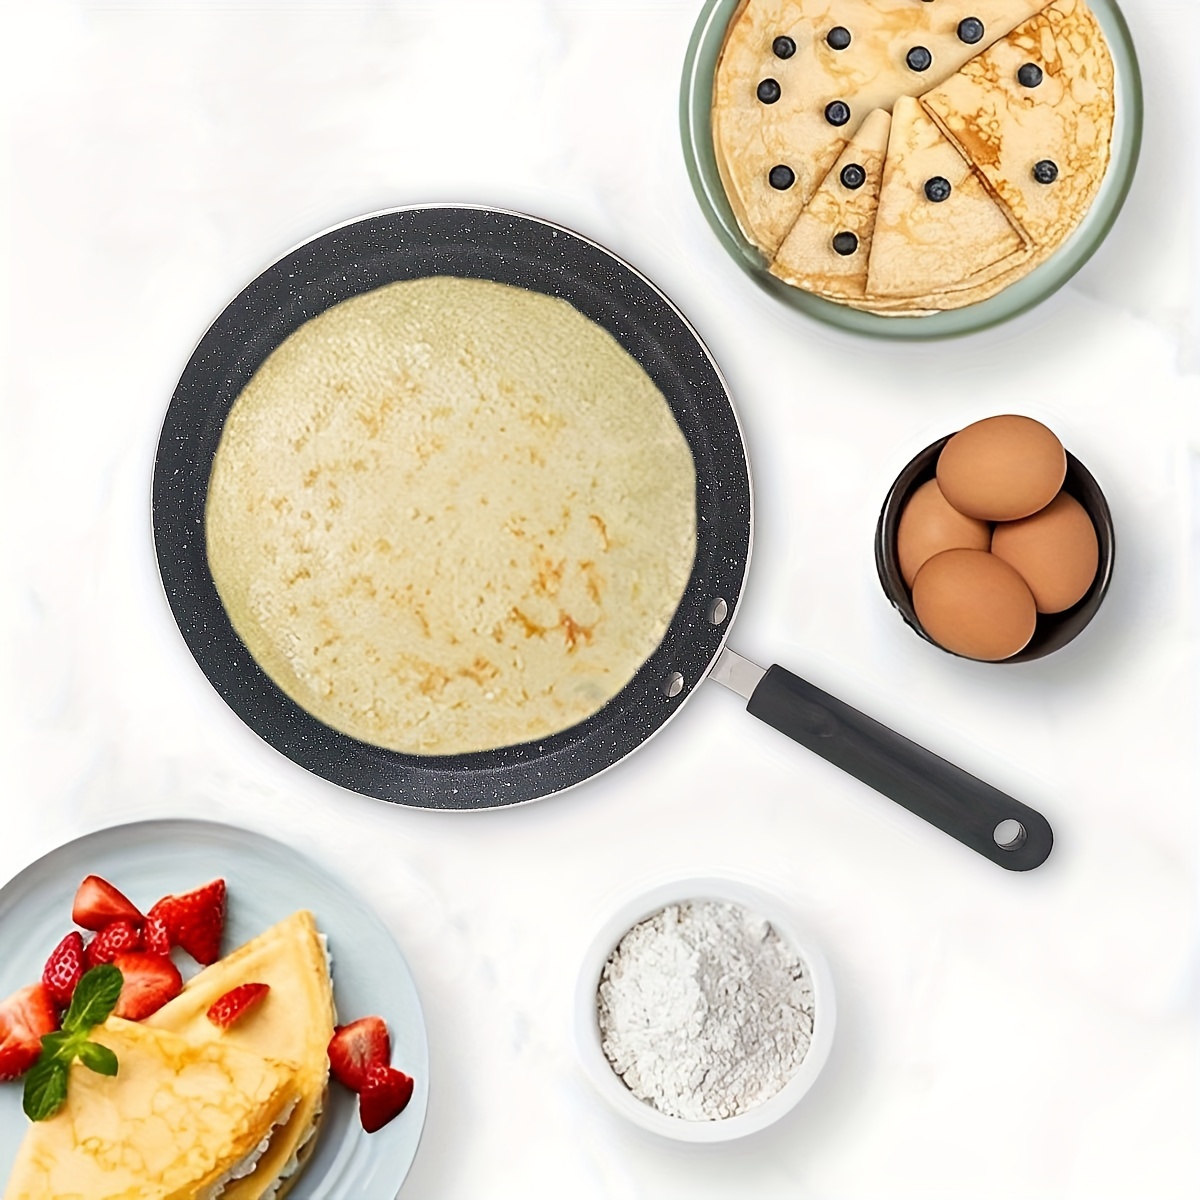 

Versatile Non-stick Aluminum Pancake Pan With Handle - Perfect For Eggs & Crepes, Compatible With Gas & Induction Stoves, Dishwasher Safe